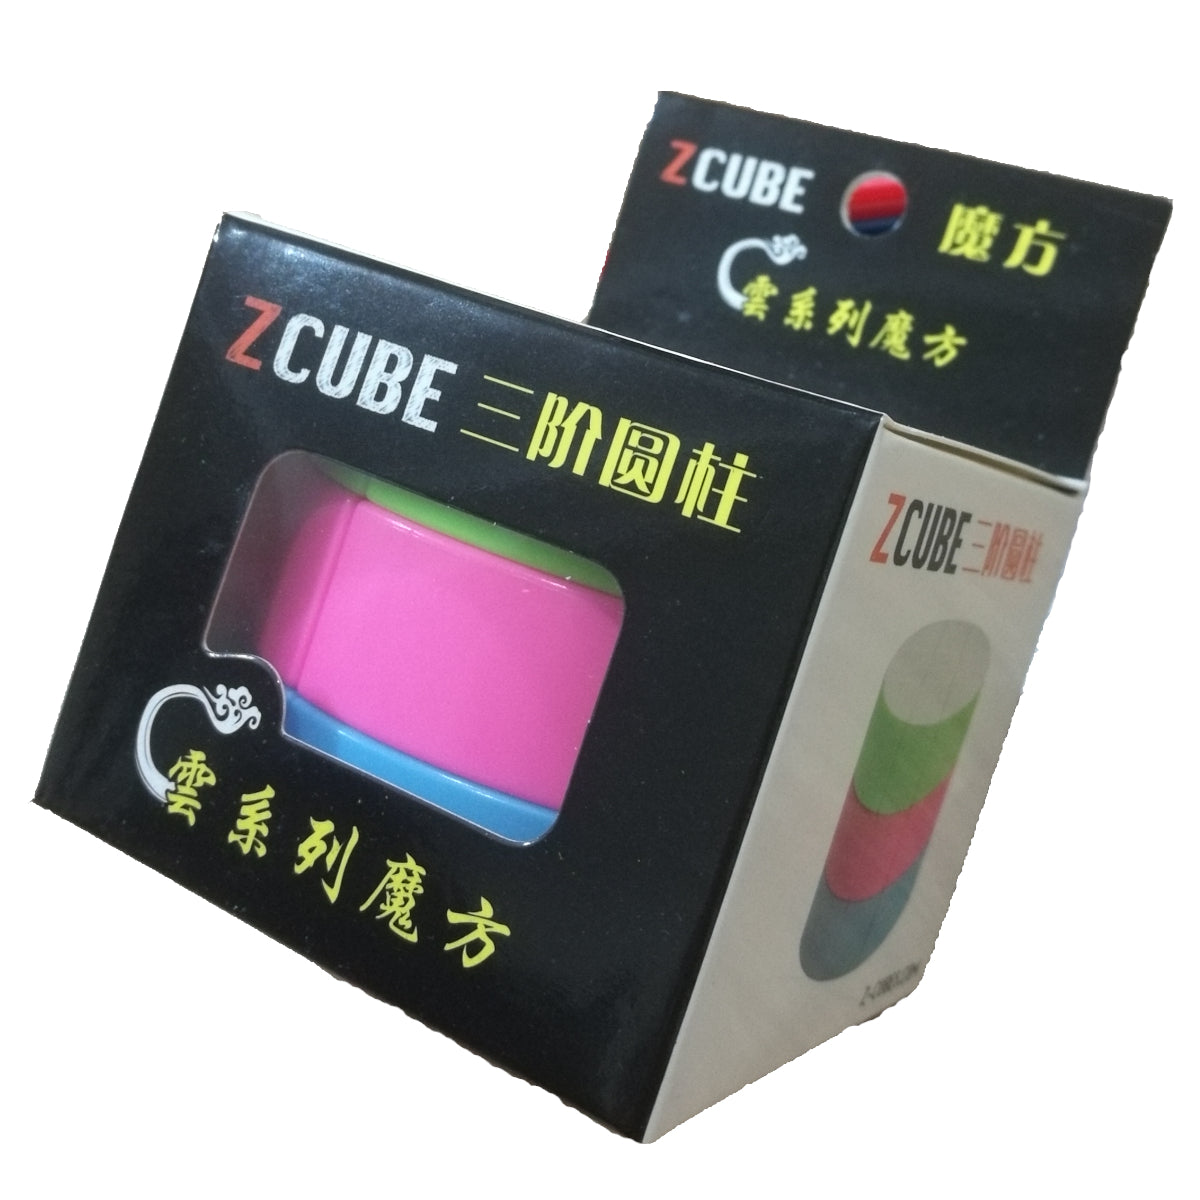 ZCube Barrel Cube - CuberSpace